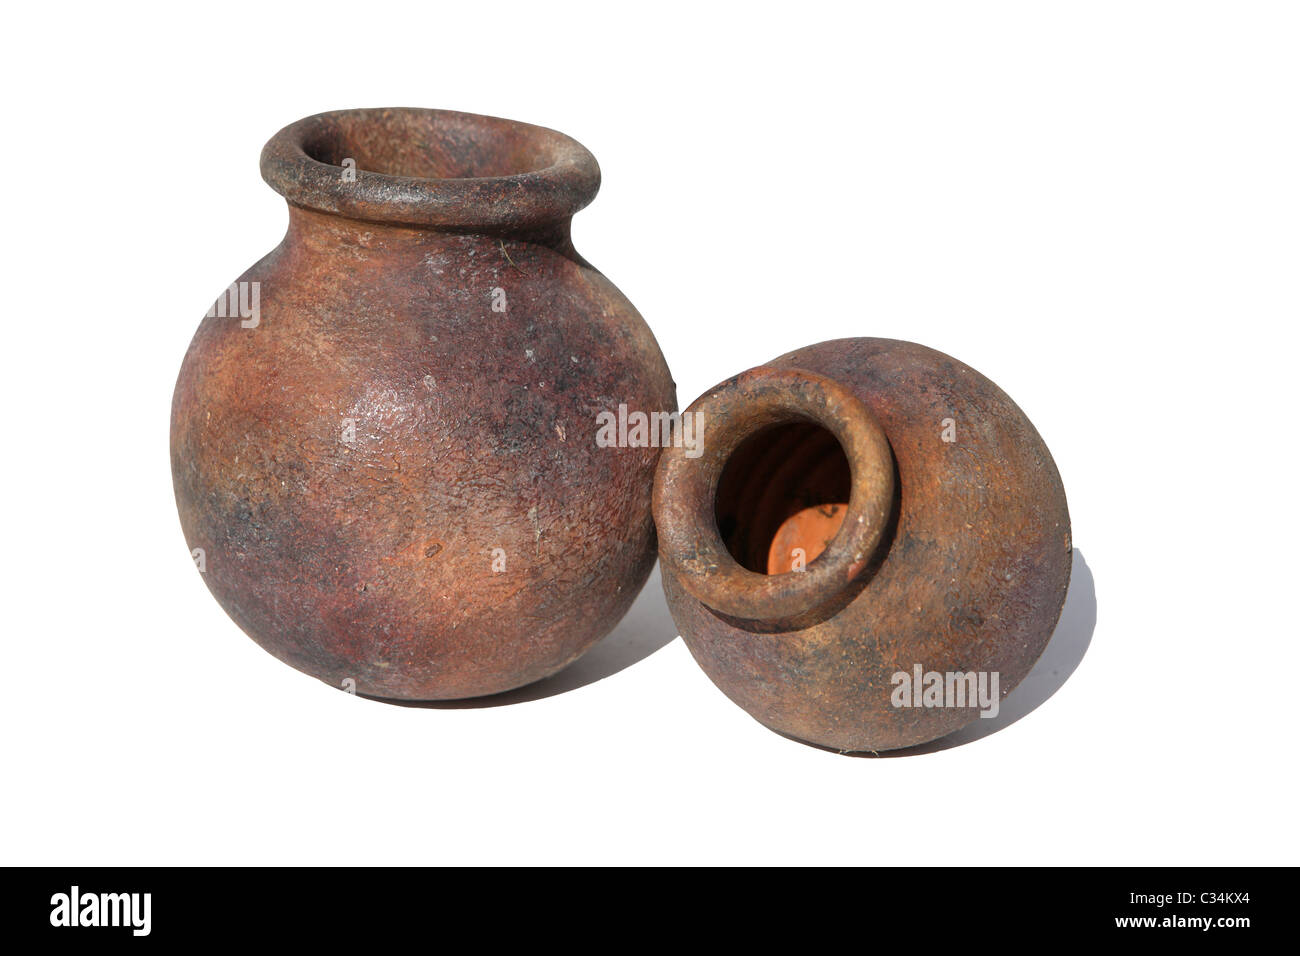 Earthenware Clay Pot Isolated on White Background Stock Photo - Image of  pottery, open: 189986110